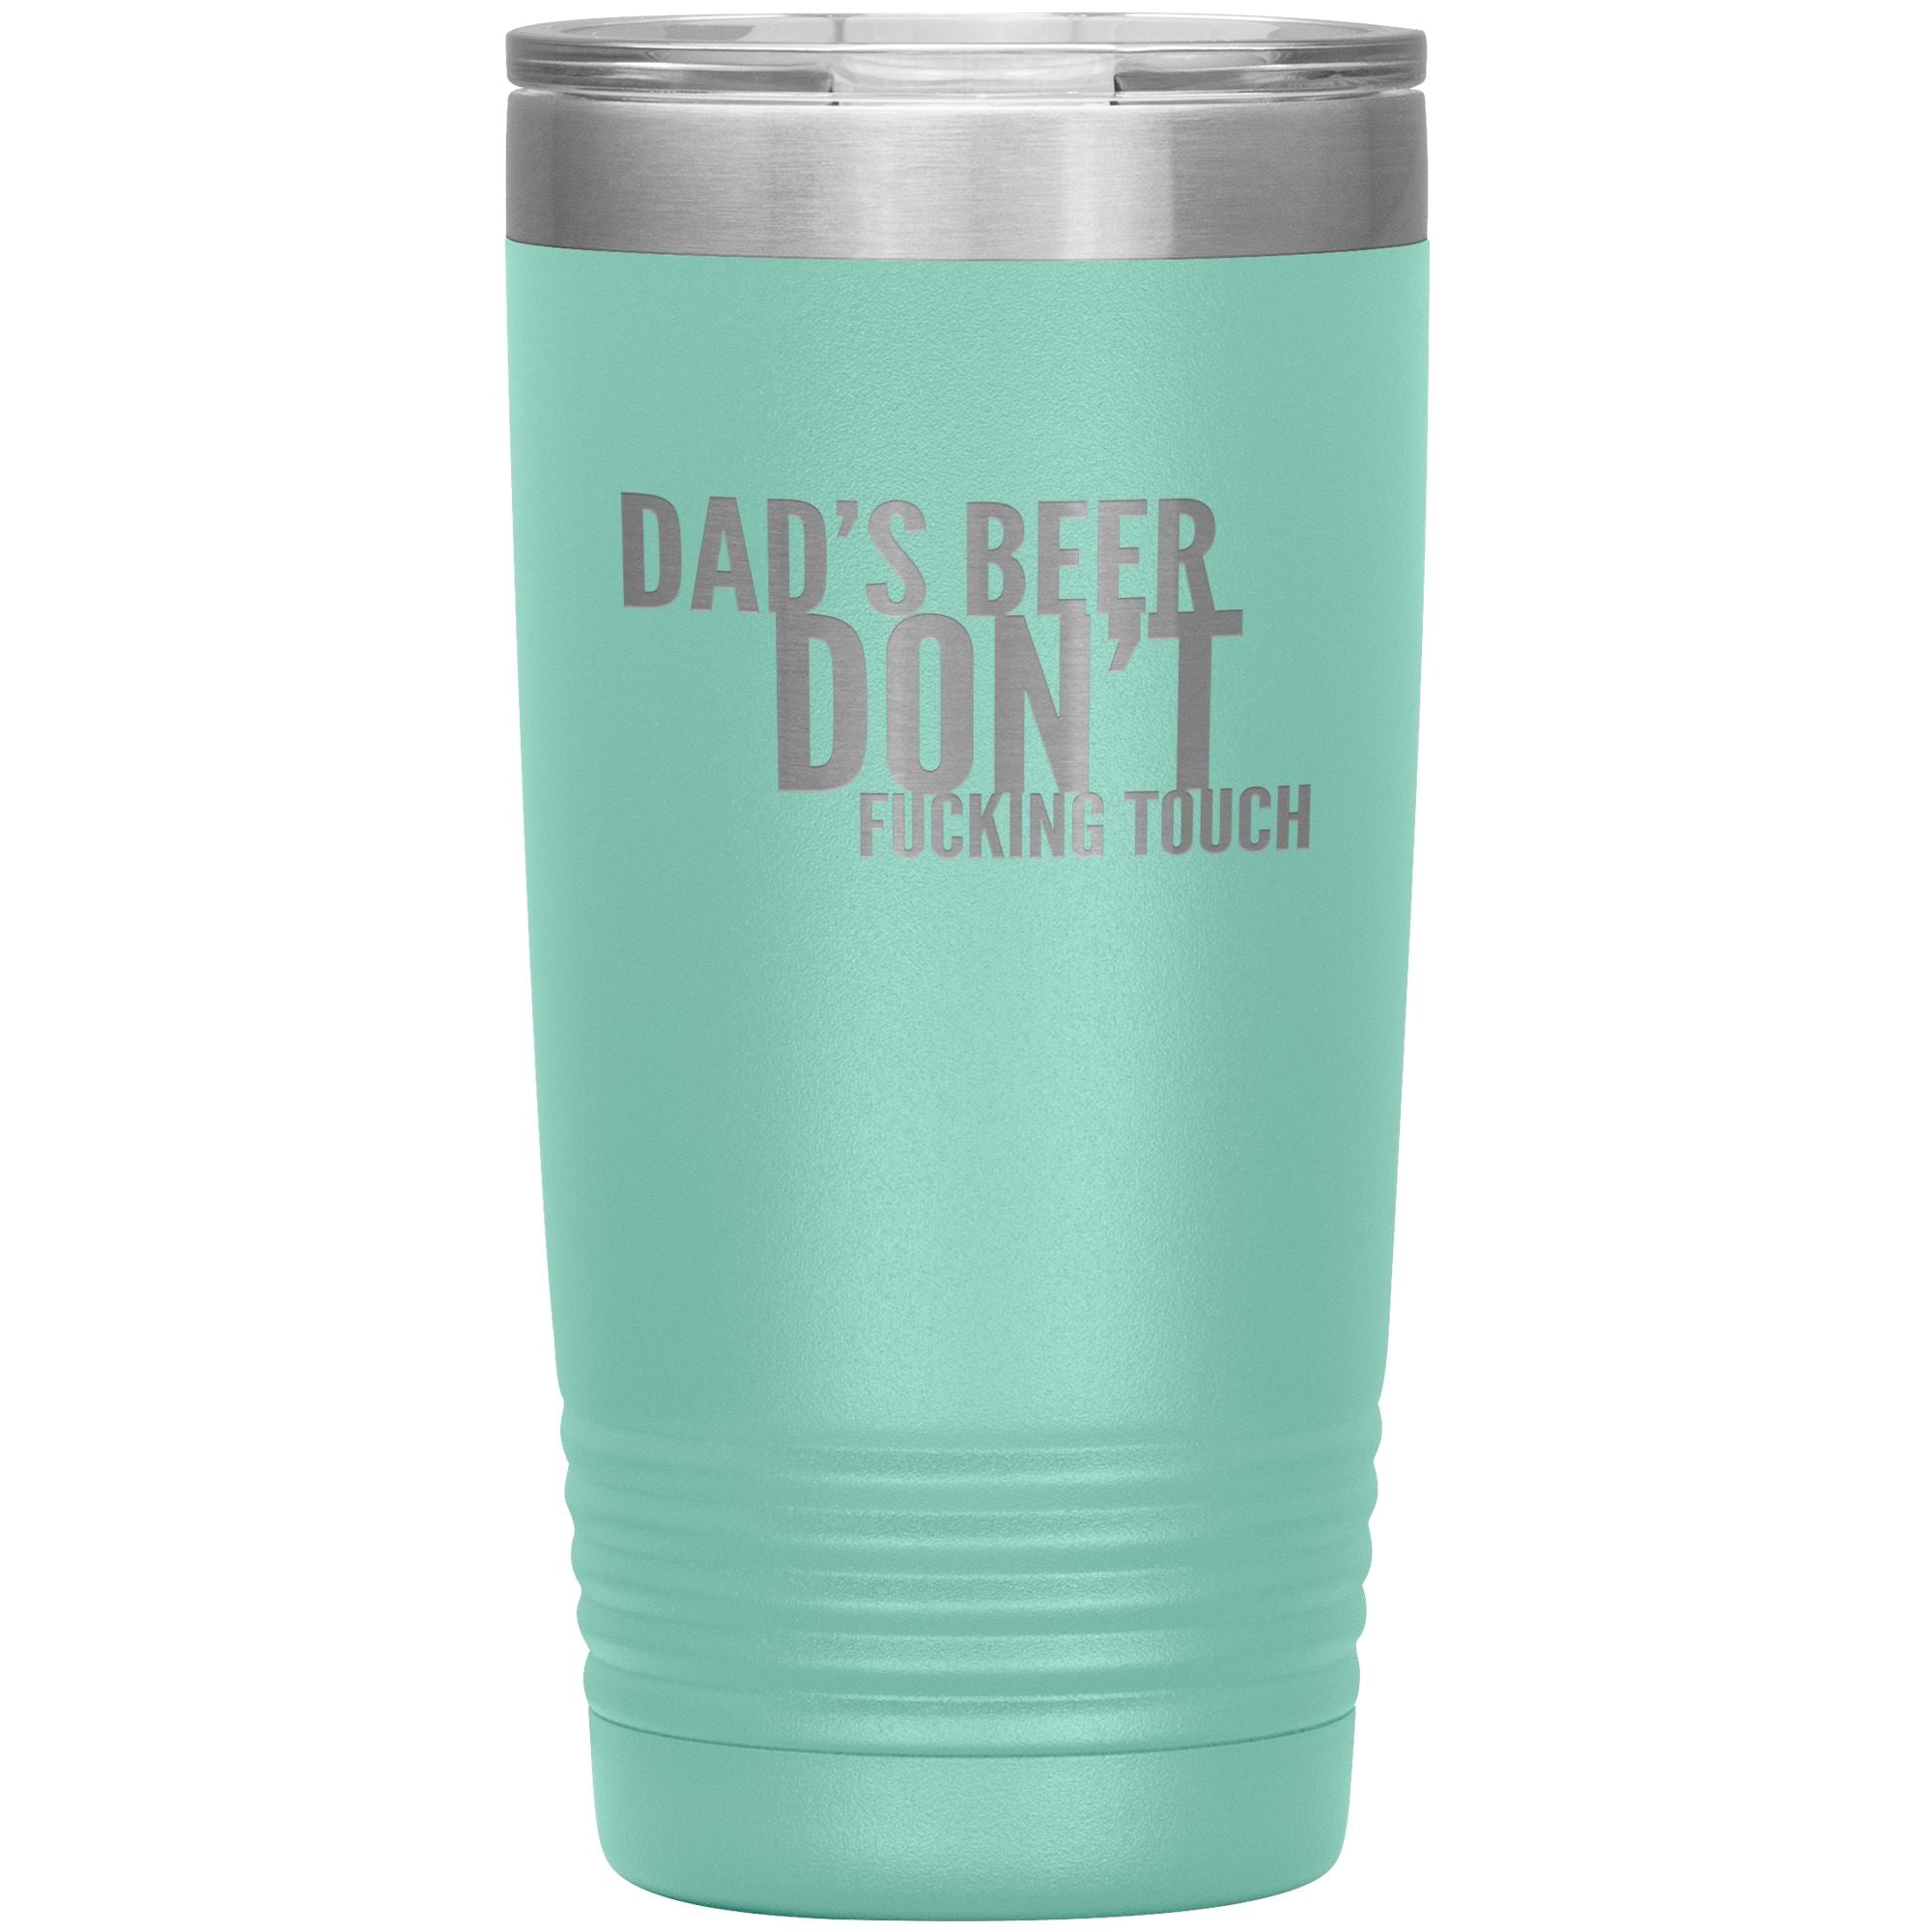 Dad's Beer Don't Fucking Touch 20oz Tumbler Tumblers Teal 